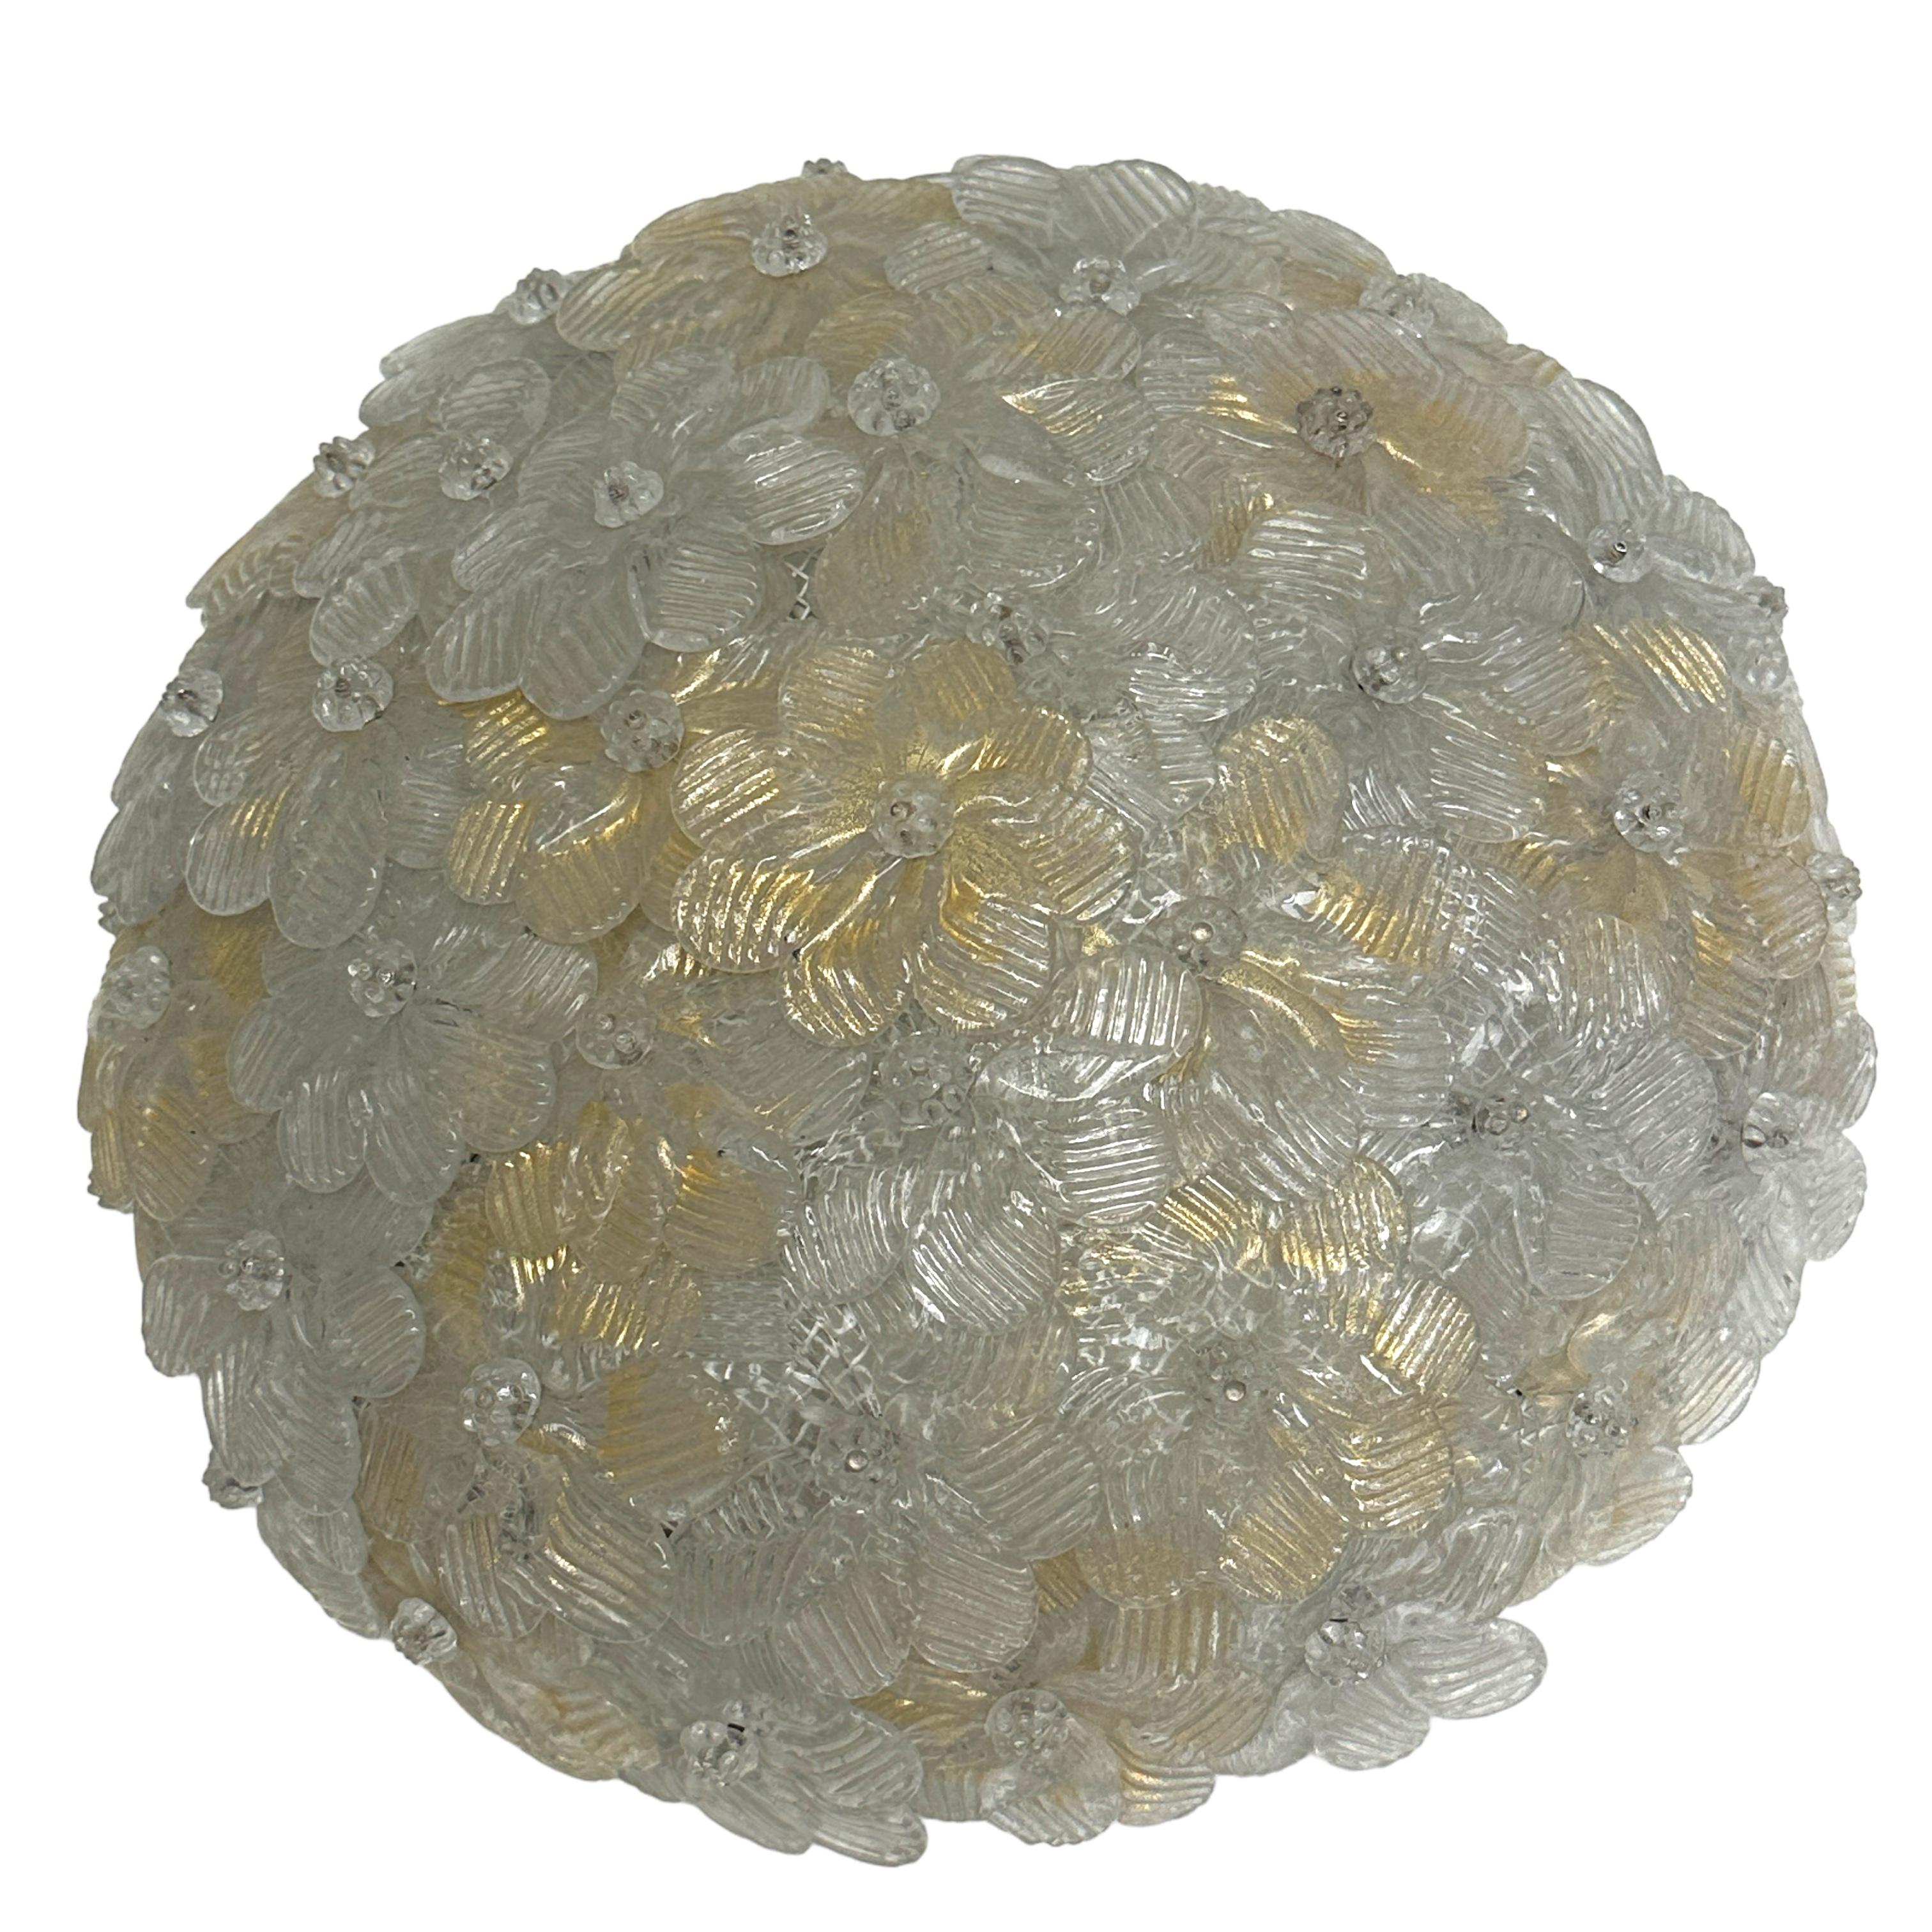 A hand blown Italian flush mount chandelier featuring overlapping crystal flowers, gold with 23-carat gold leaf fleck inclusions, mounted on a basket frame. The fixture requires two European E14 / 110 volt candelabra bulbs, each bulb up to 60 watts.